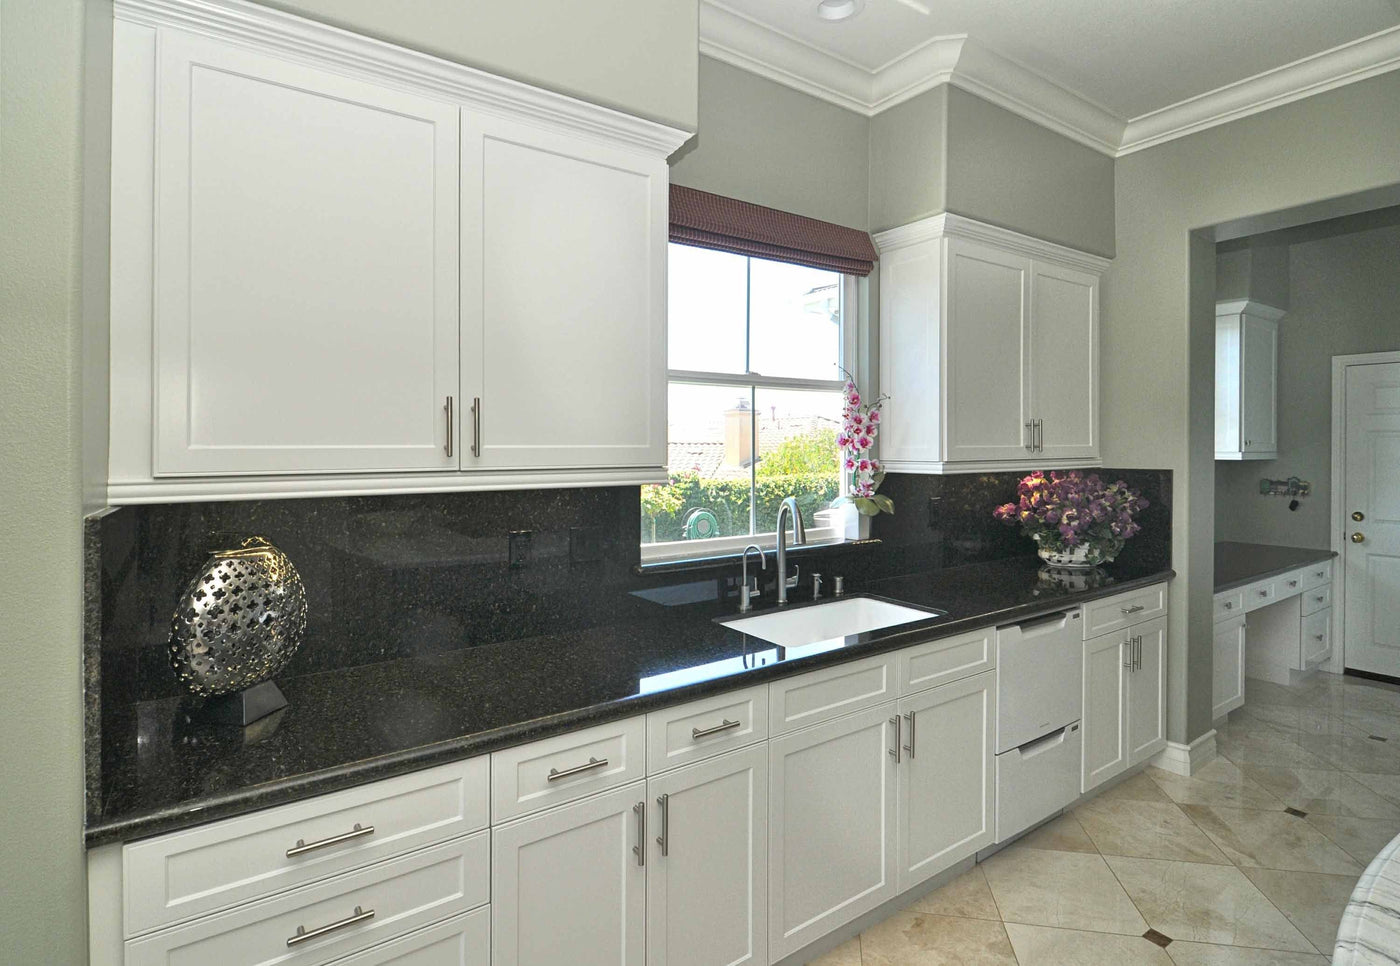 Top 10 Characteristics of High Quality Kitchen Cabinets